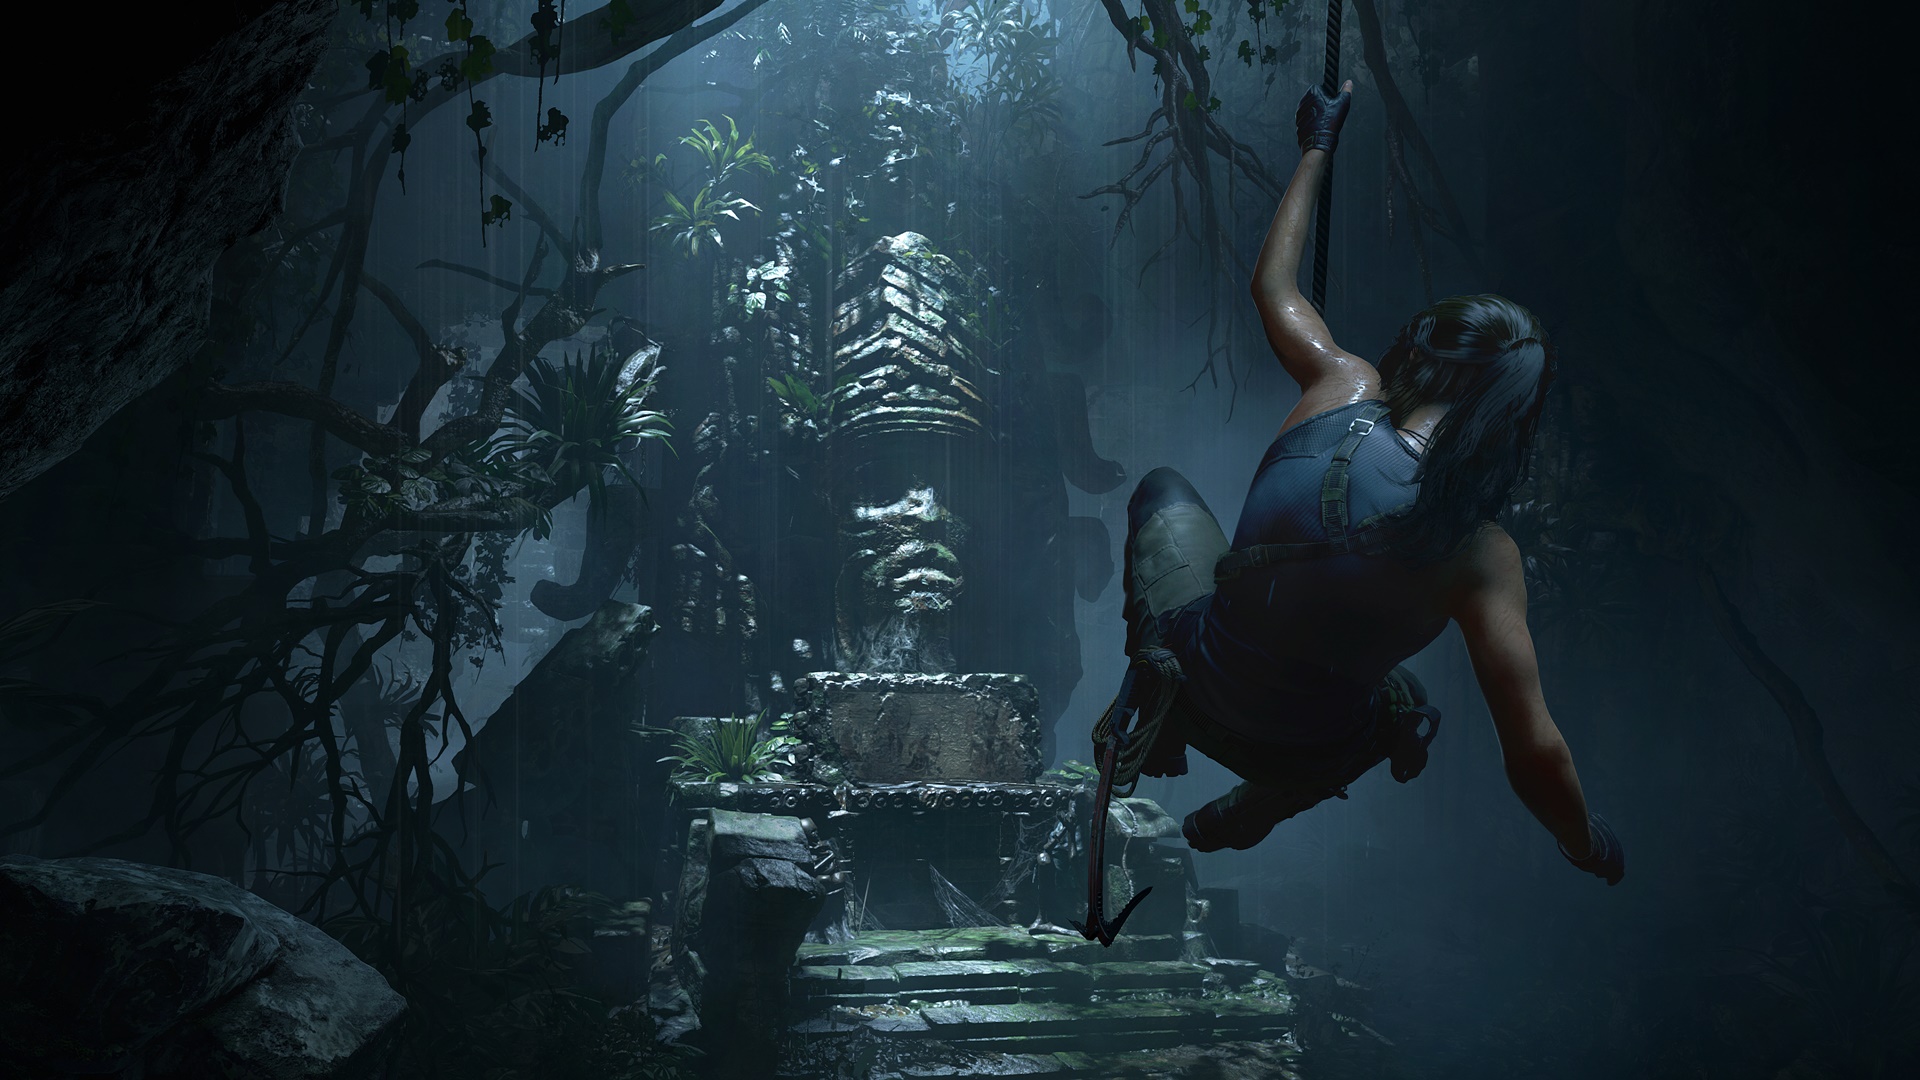 Lara Croft: Tomb Raider Will Be Available to Stream on Netflix in